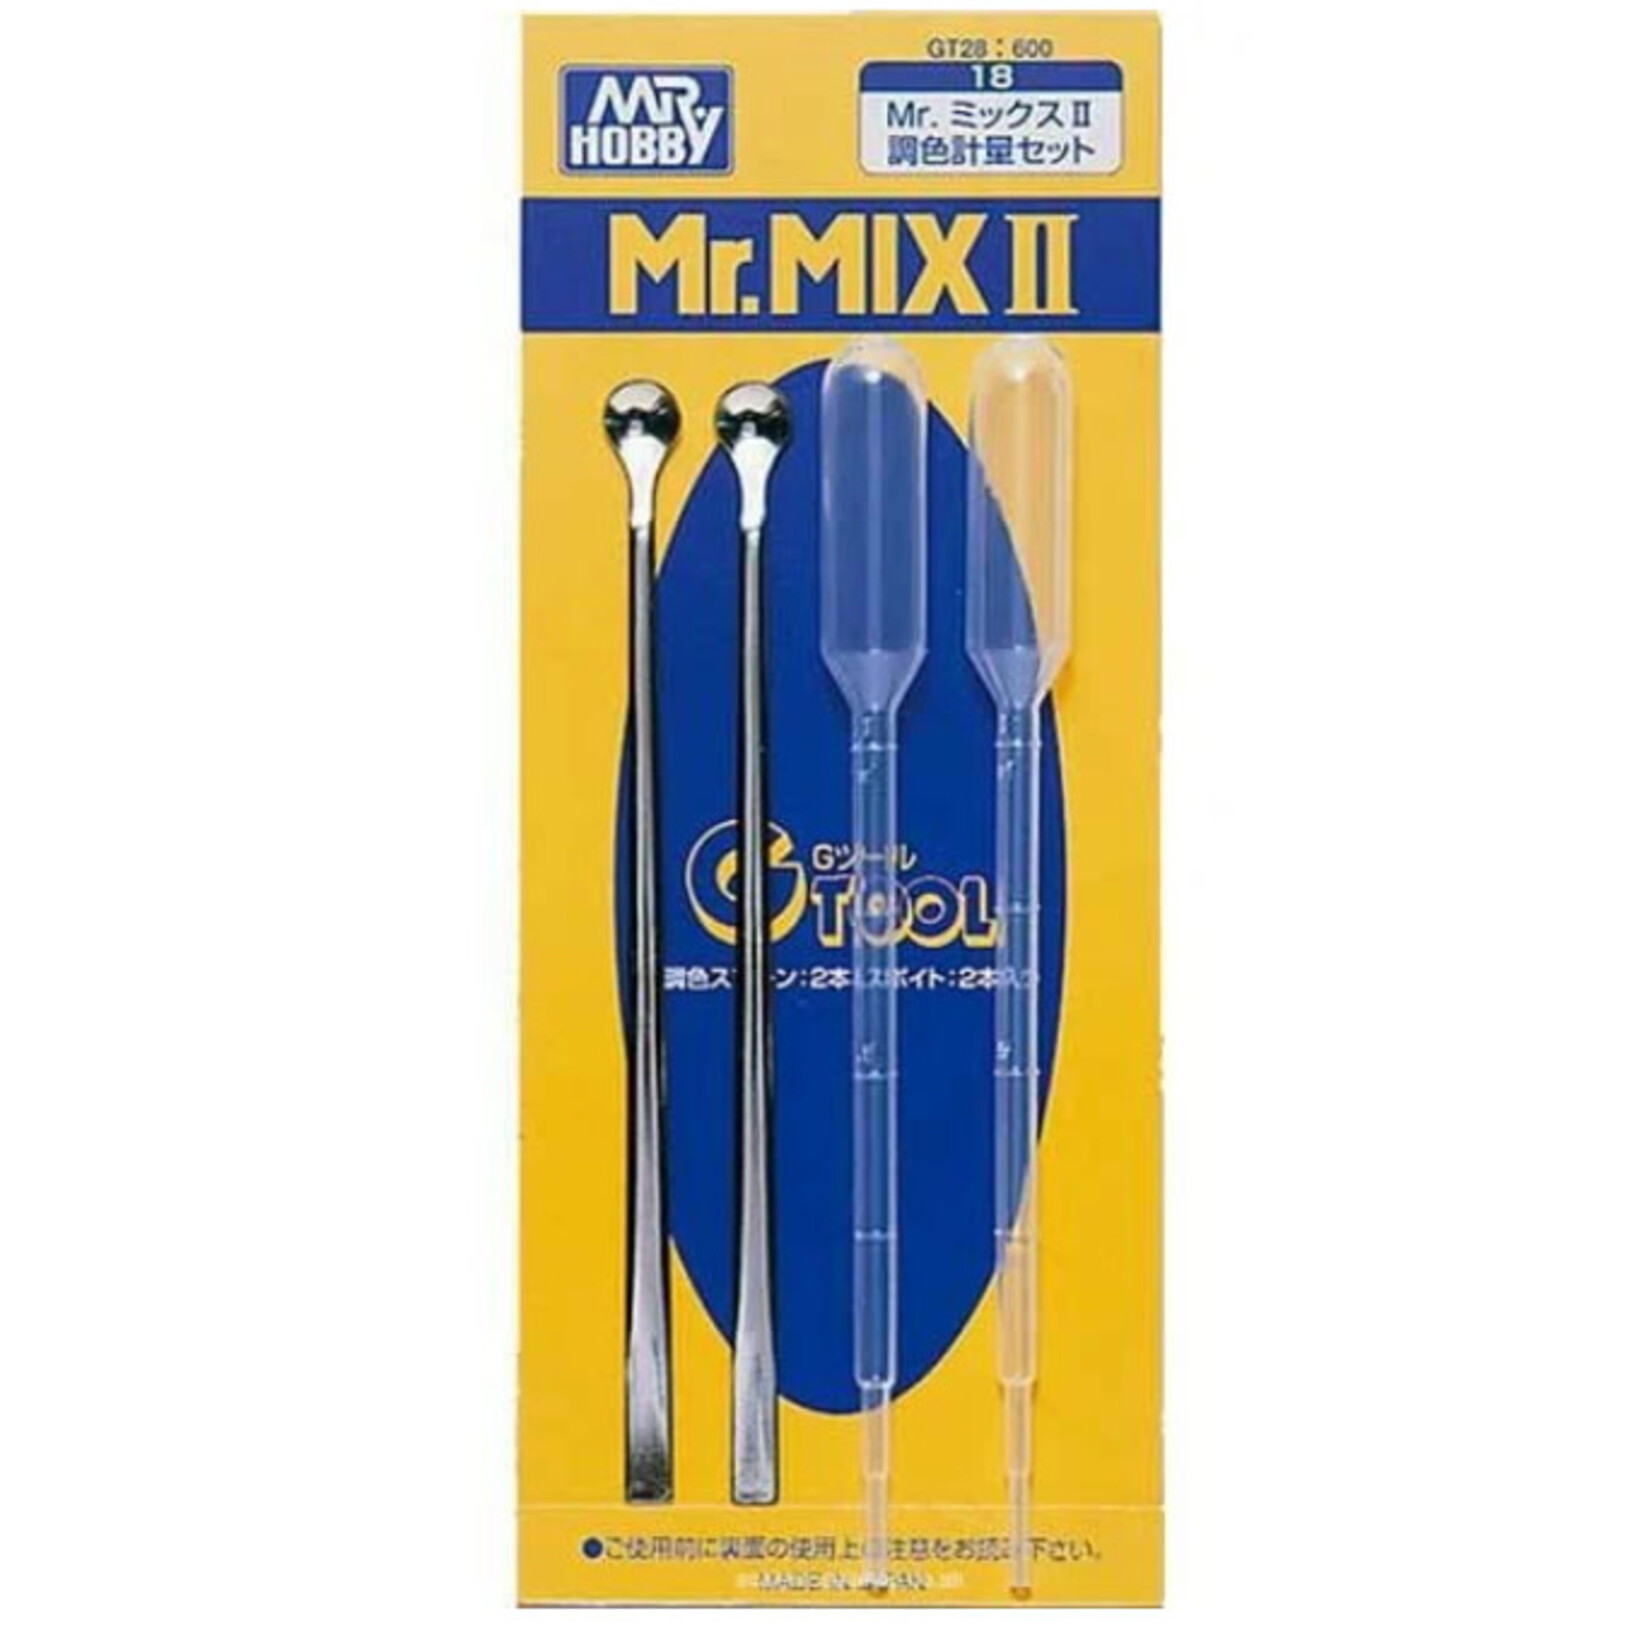 GNZ MR MIX II PIPETTE SET AND SPOON GT28